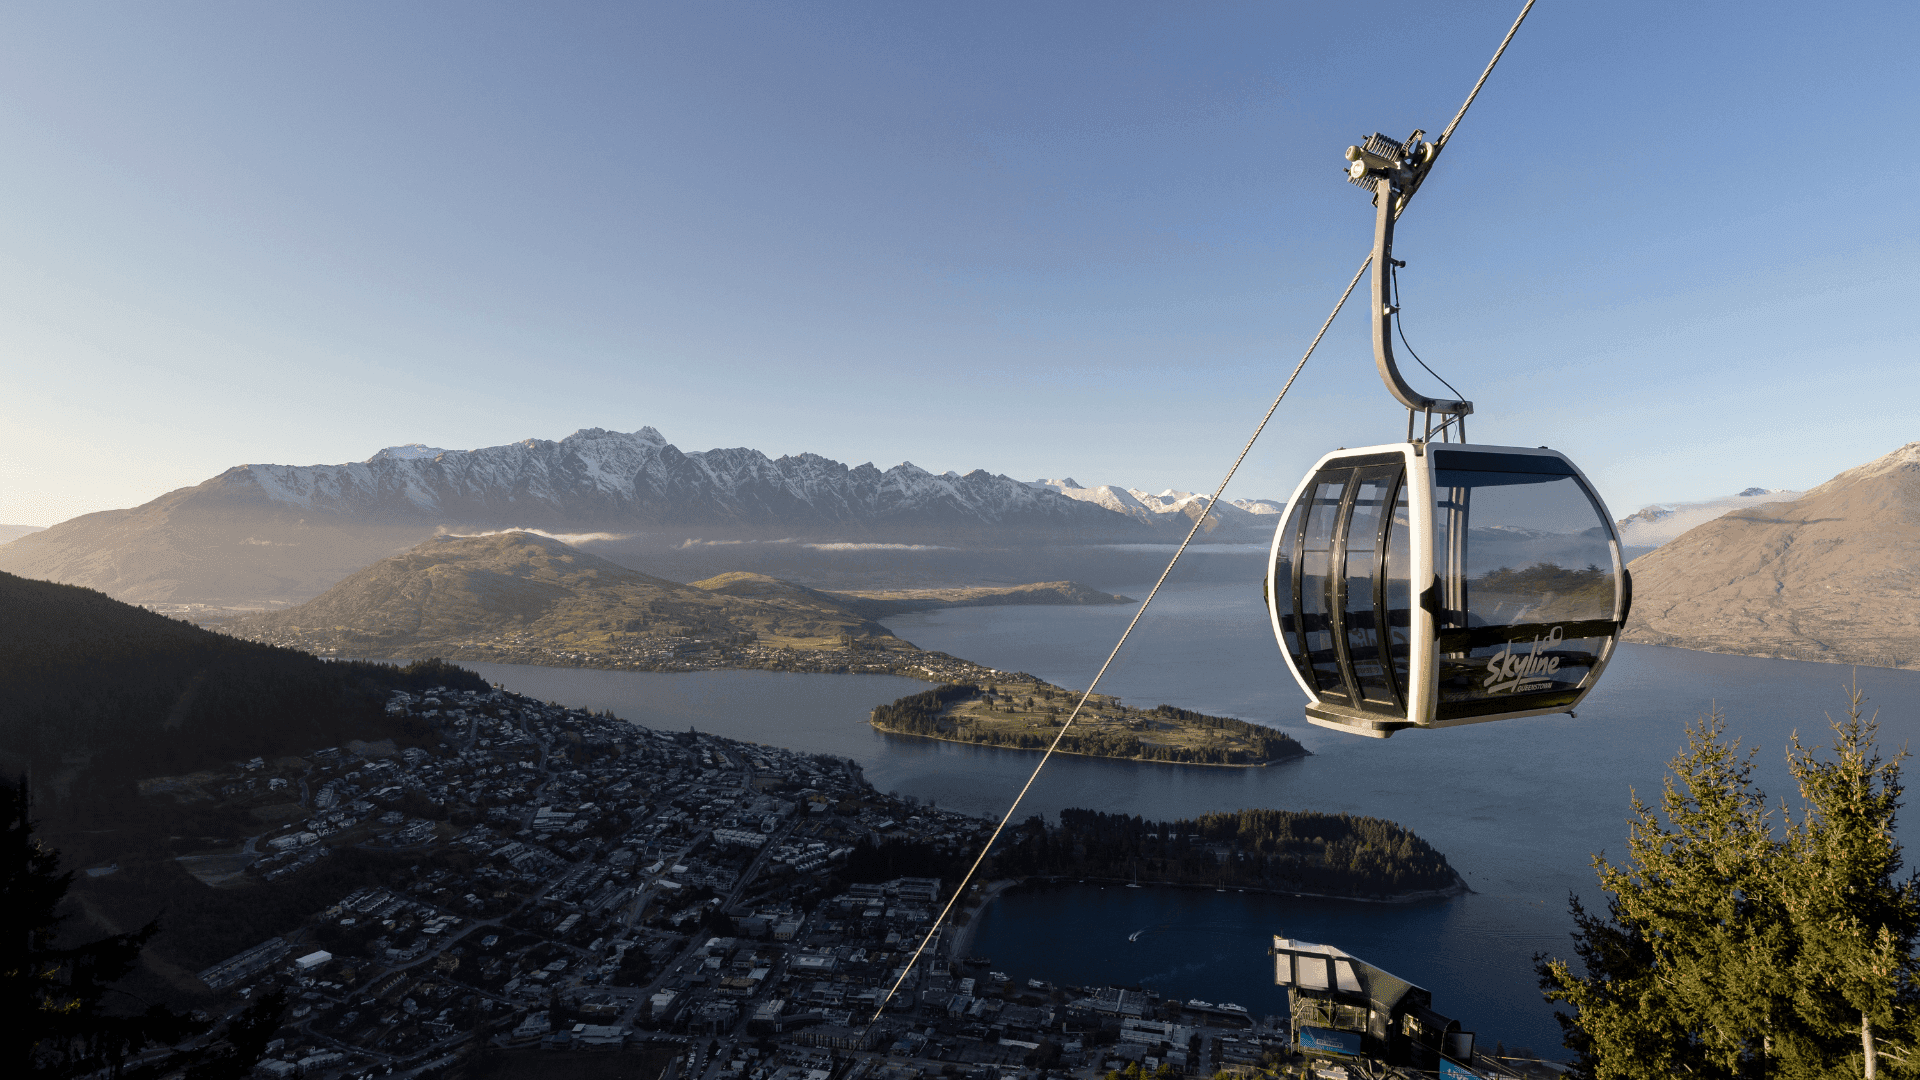 Gondola going up the mountain in Queenstown showing view of lake